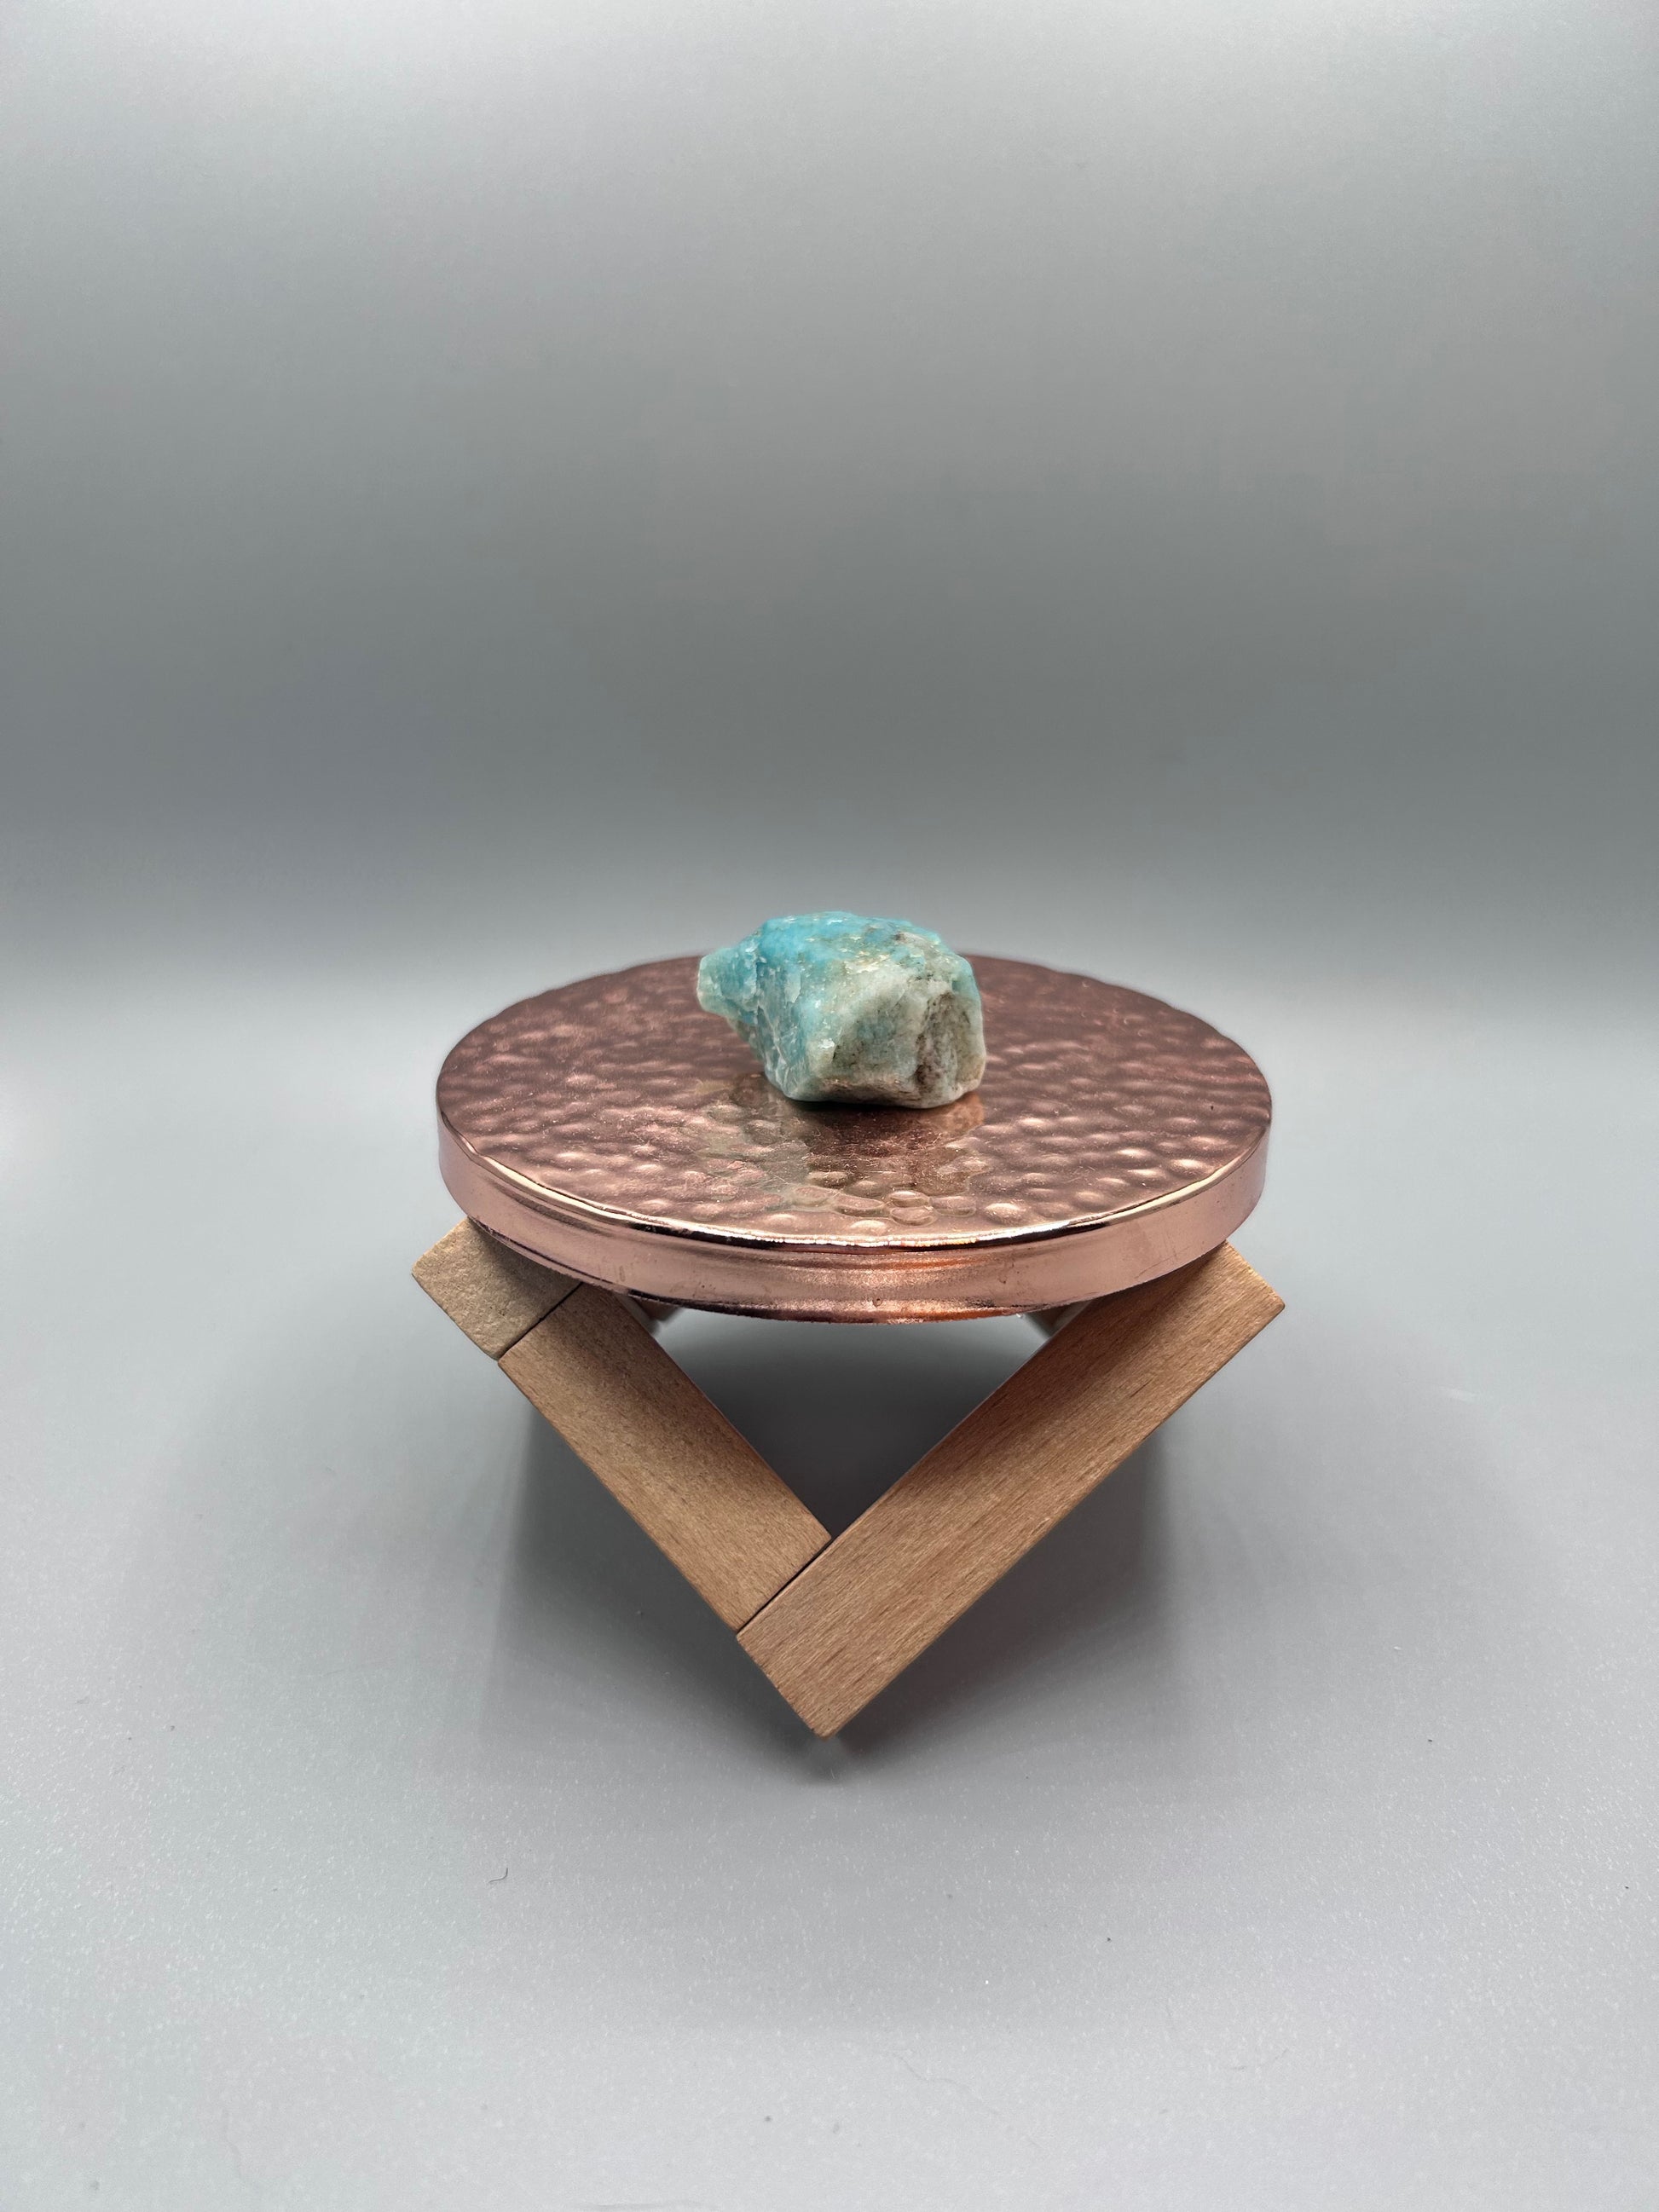 amazonite stone posed inside on copper plate.